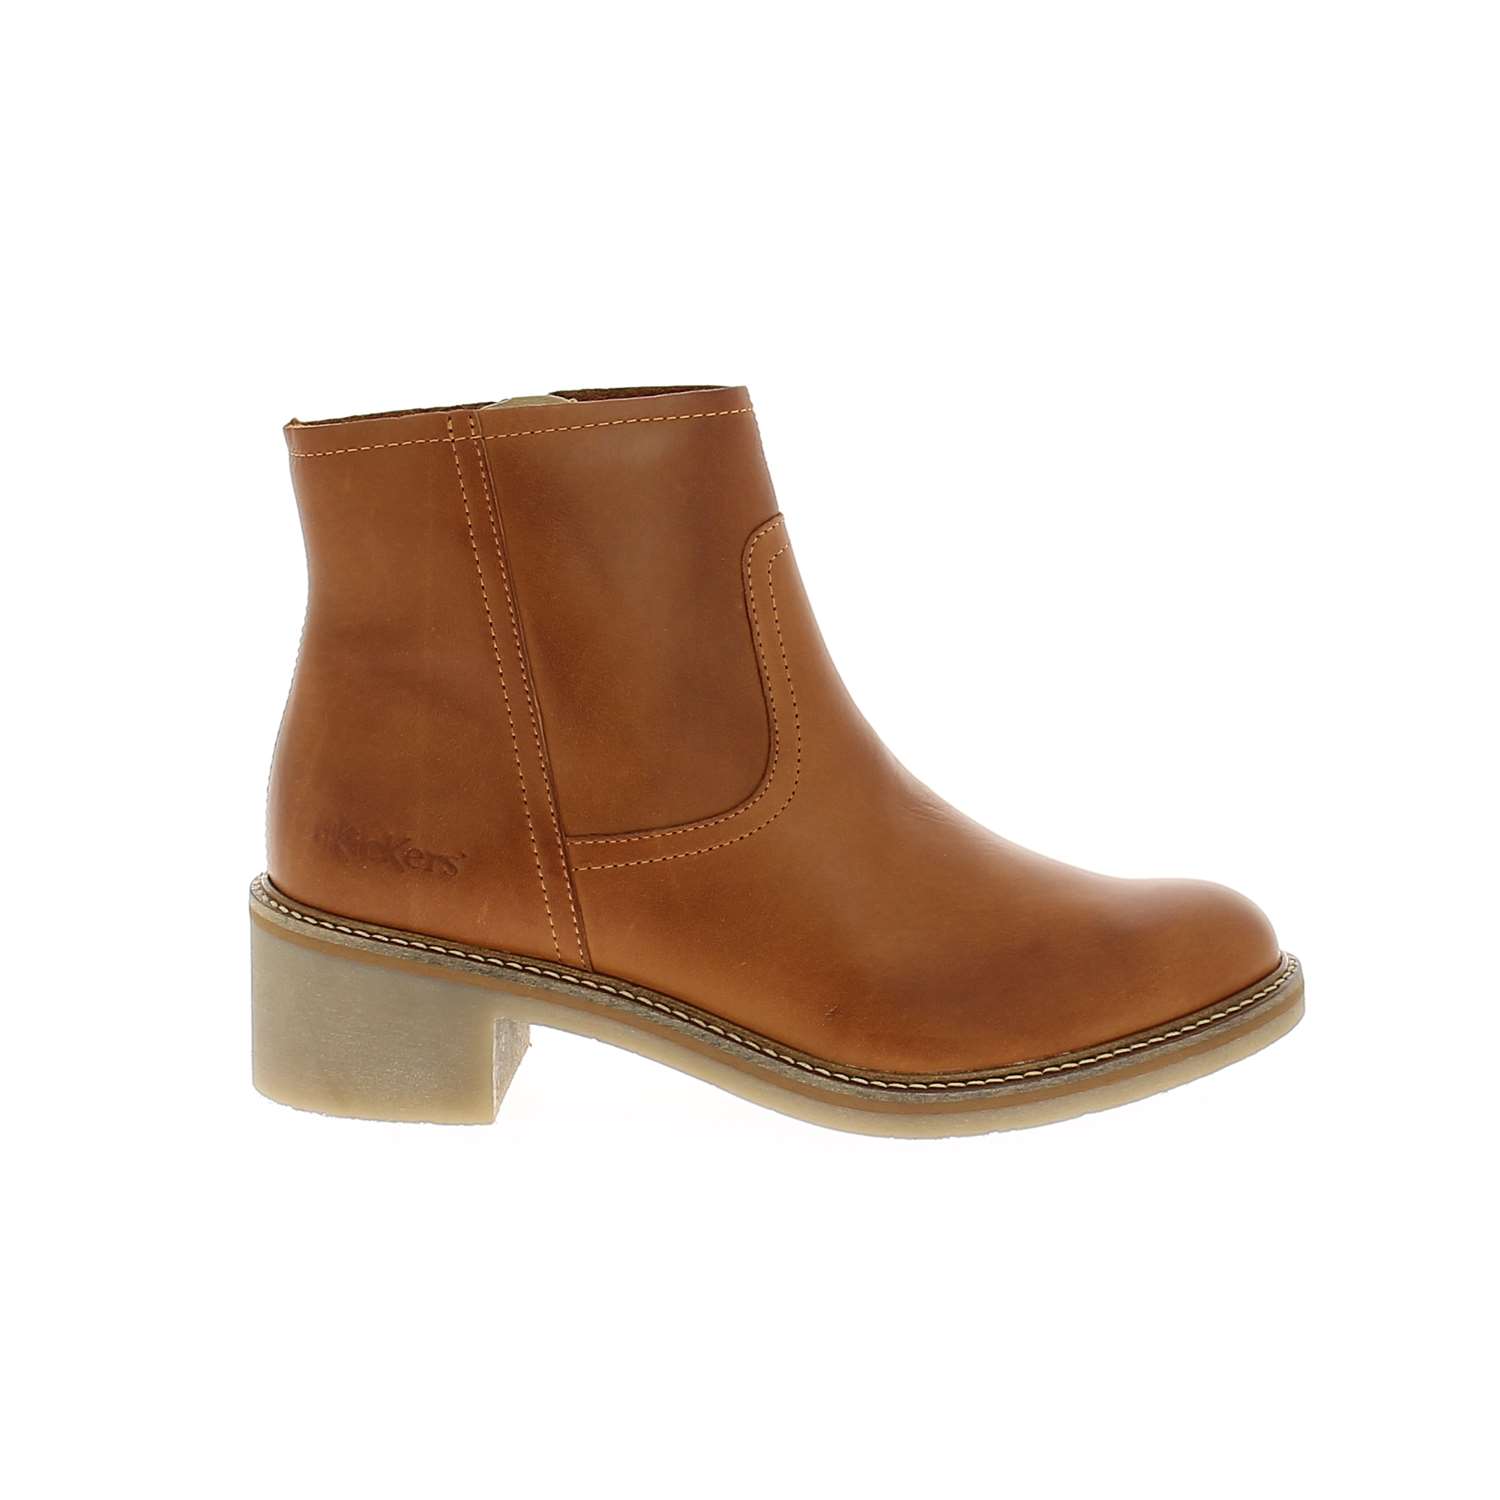 02 - OXYBOOT - KICKERS - Boots et bottines - Cuir